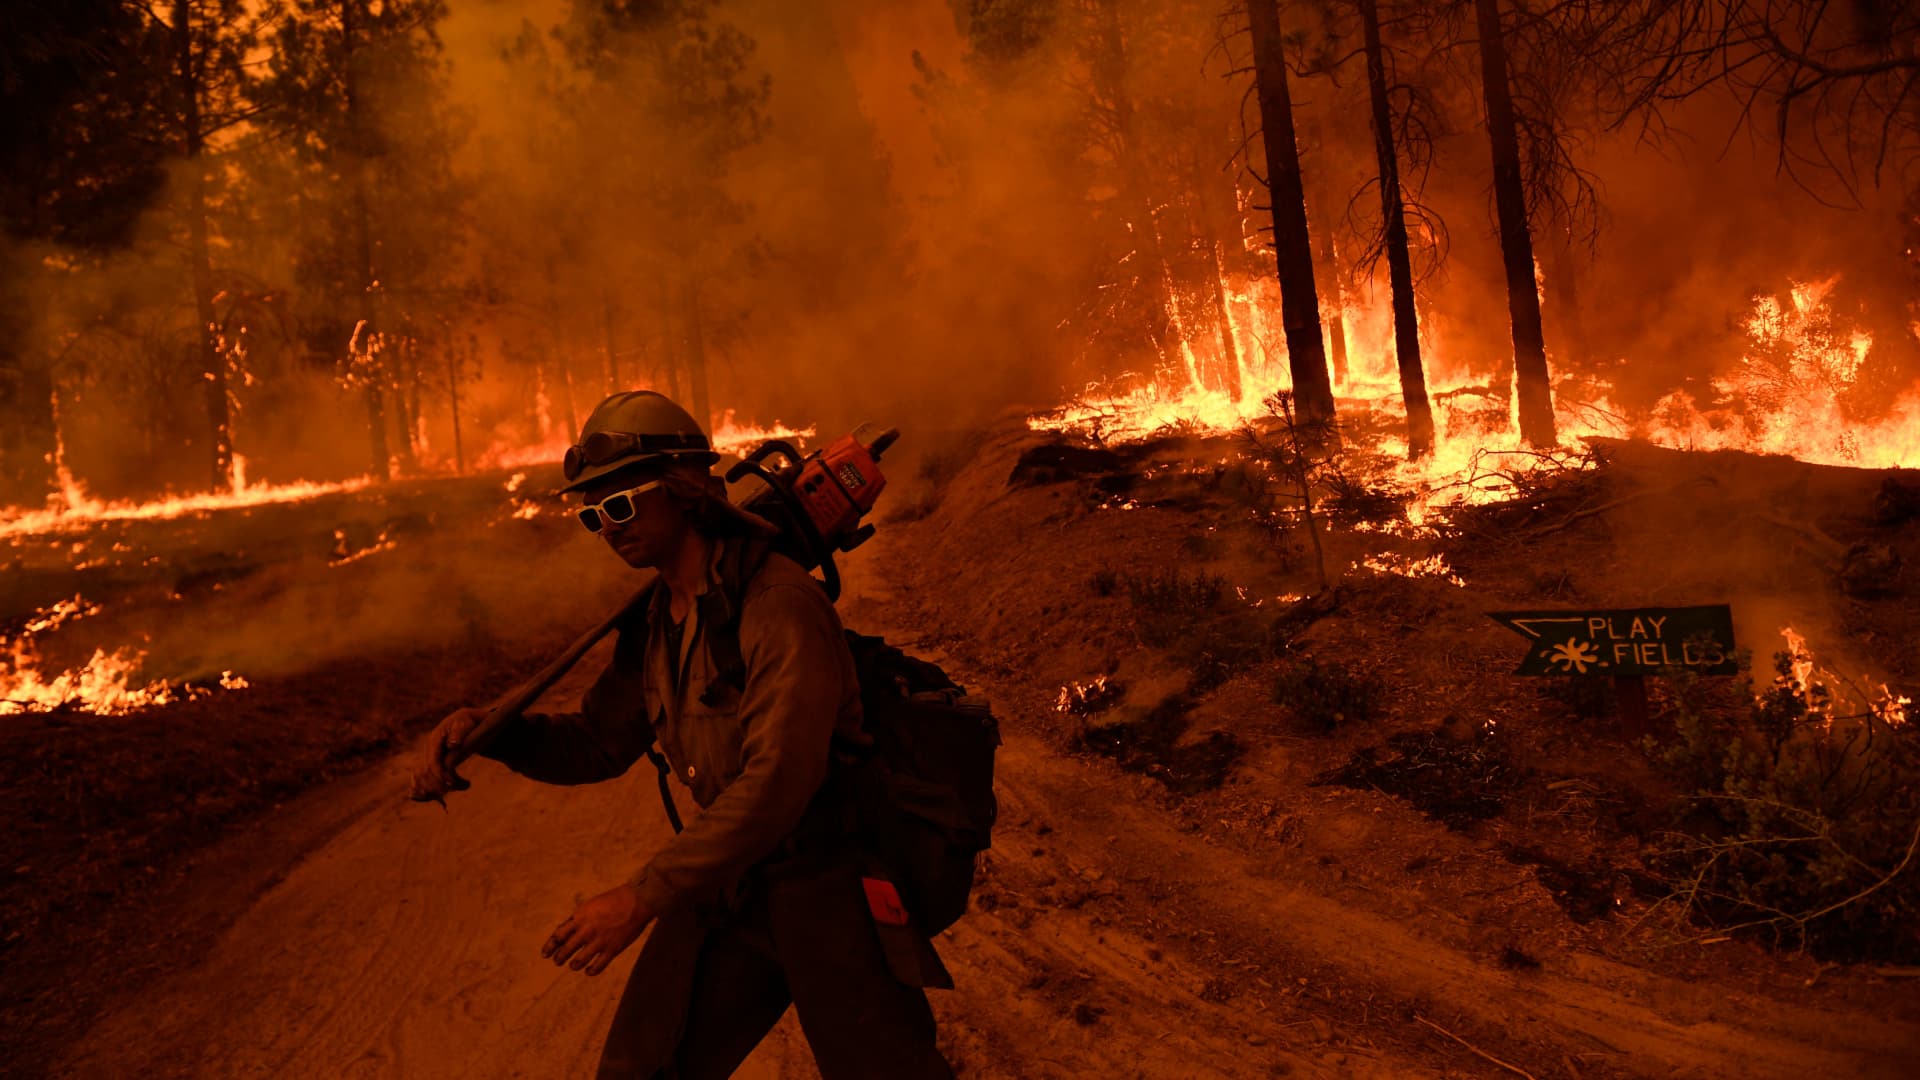 A firefighter with Alaska's Pioneer Peak Interagency Hotshot Crew carries a chain saw as the Windy Fire burns in the Sequoia National Forest near Johnsondale, California, on Sept. 22, 2021.